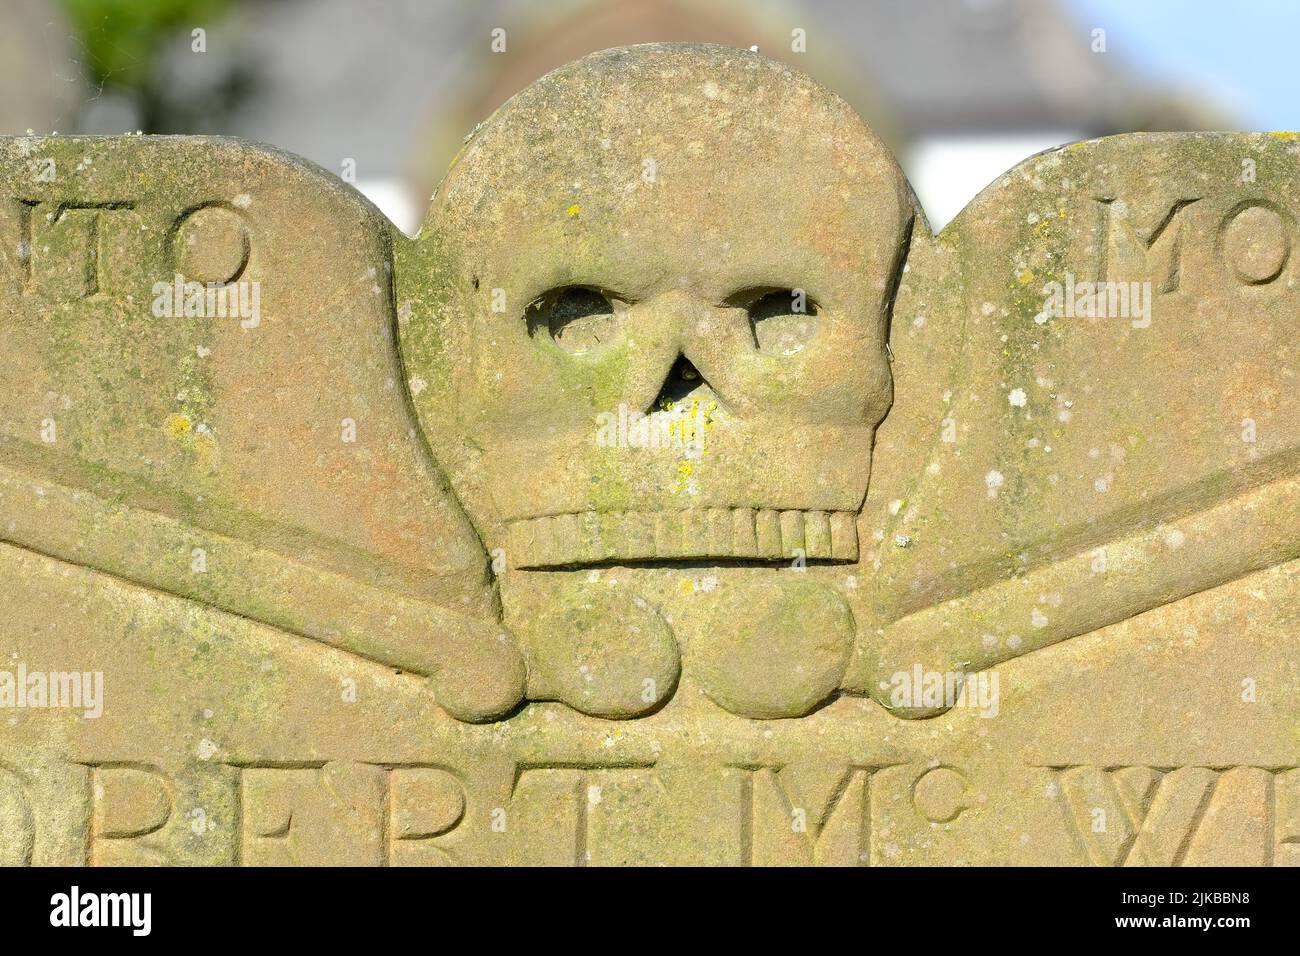 Skull and crossbones design on an 17th Century grave headstone dated 1685 at Kirkandrews, Dumfries and Galloway, Scotland Stock Photo